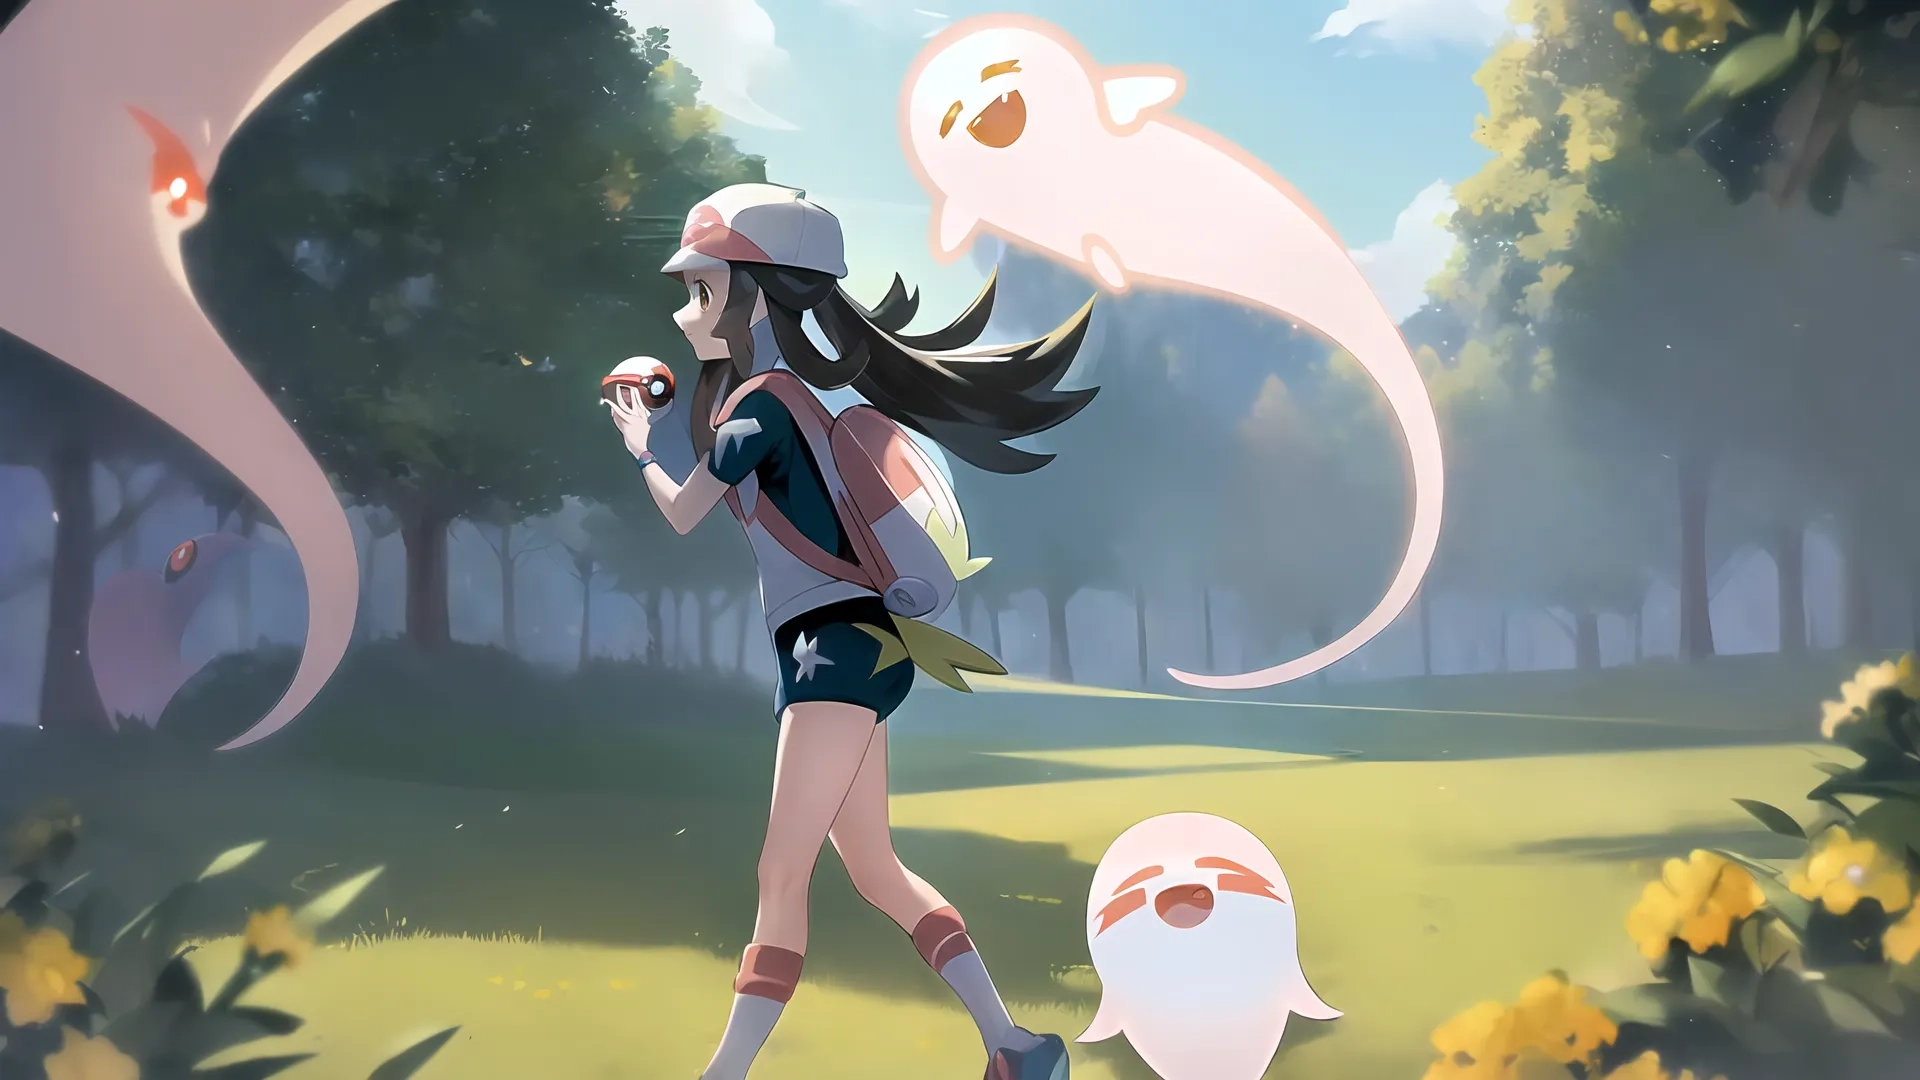 girl carrying a baseball bat in grass with ghost ghosts nearby and trees behind her behind her in the background, sunlit evening and blue sky,
